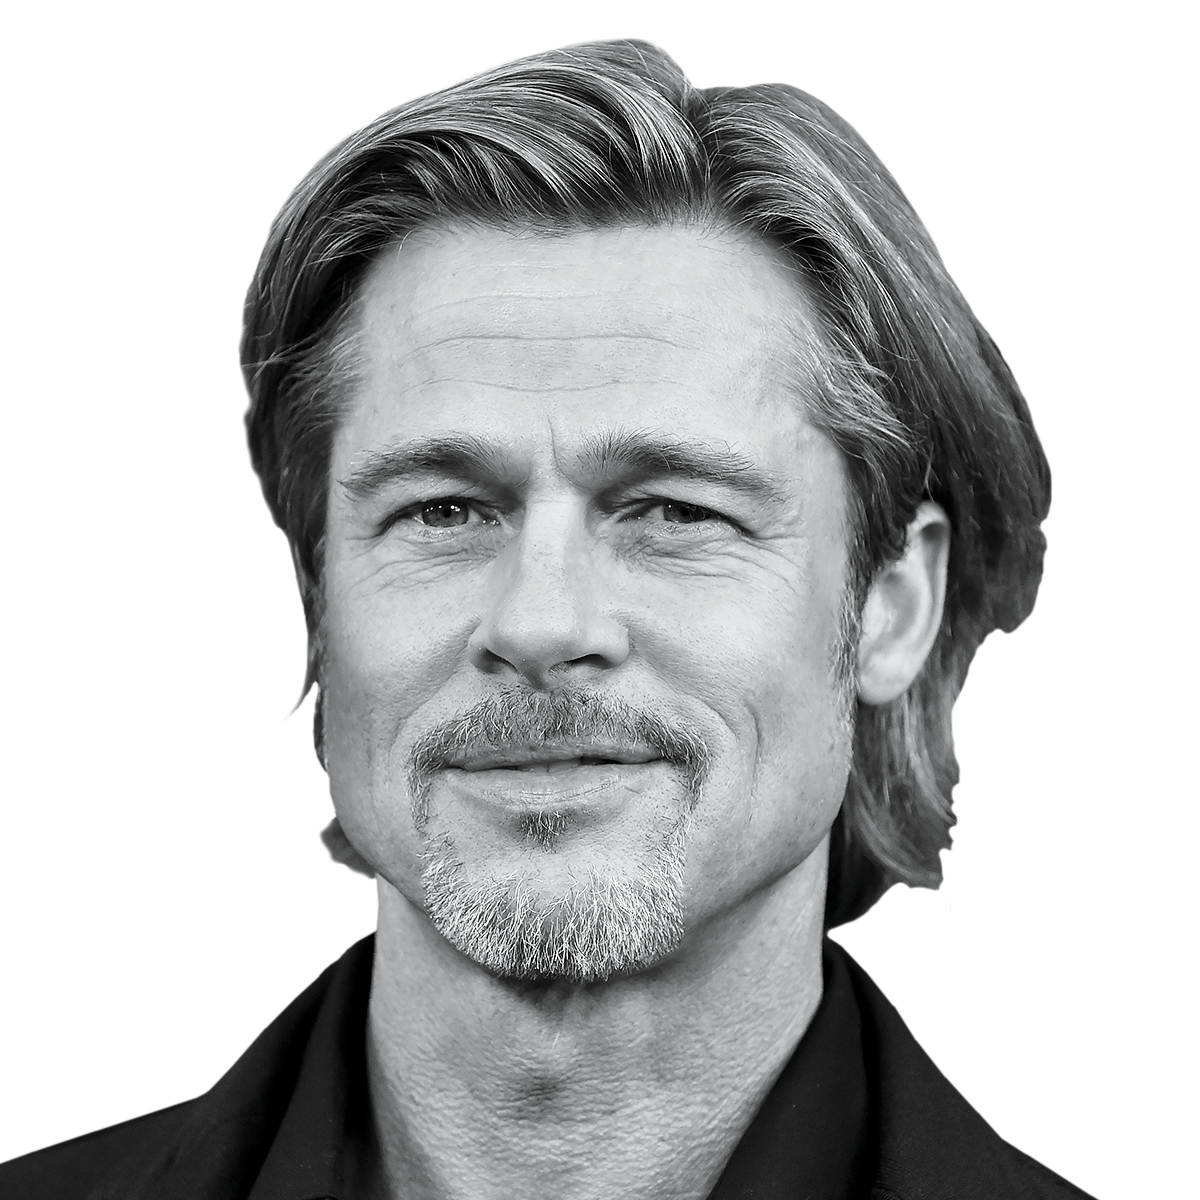 Brad Pitt Face PNG Image High Quality PNG Image